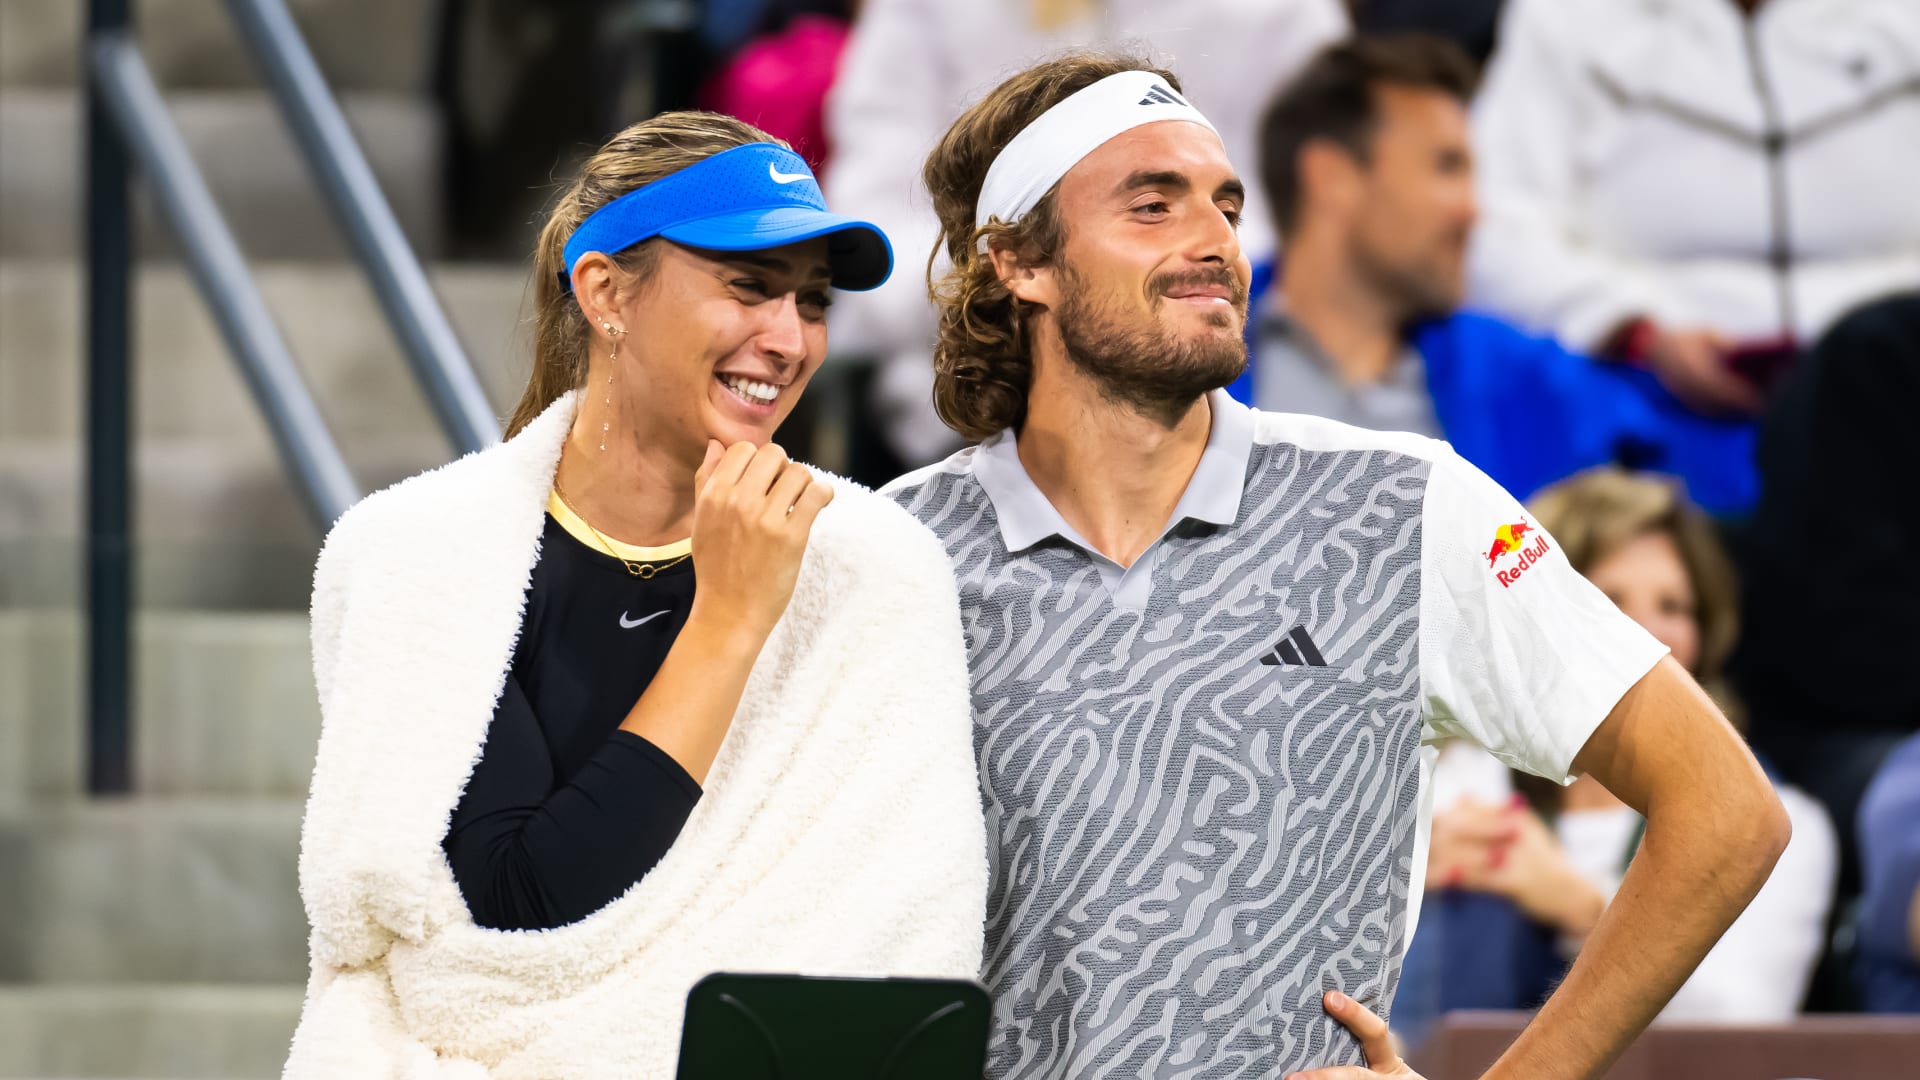 Paula Badosa announces that she and Stefanos Tsitsipas have ended their  romantic relationship